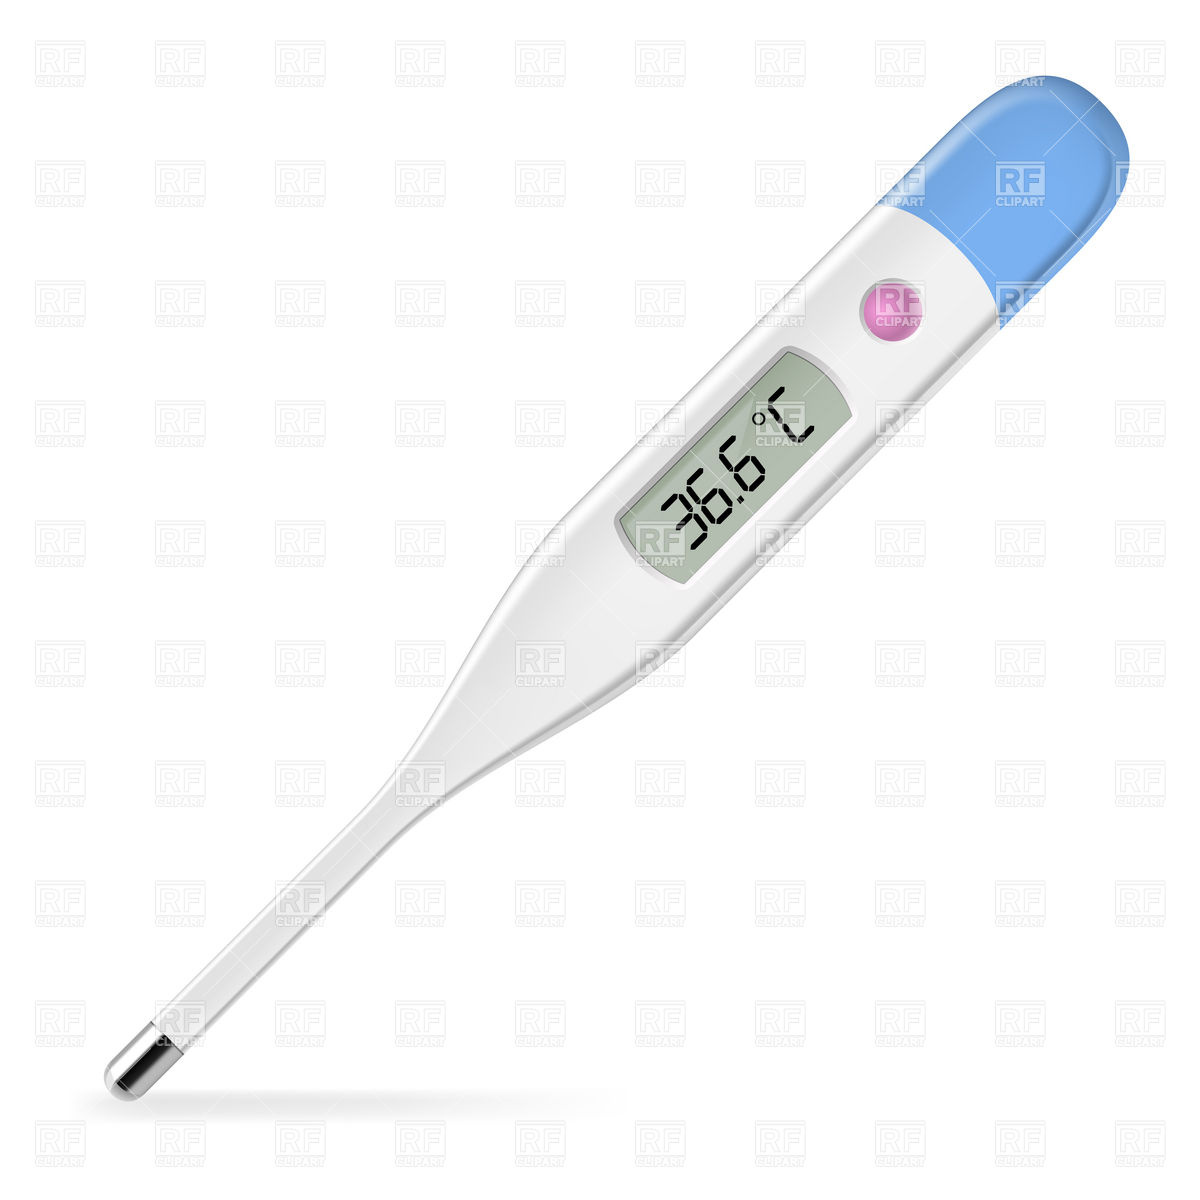 Medical Thermometer Clip Art